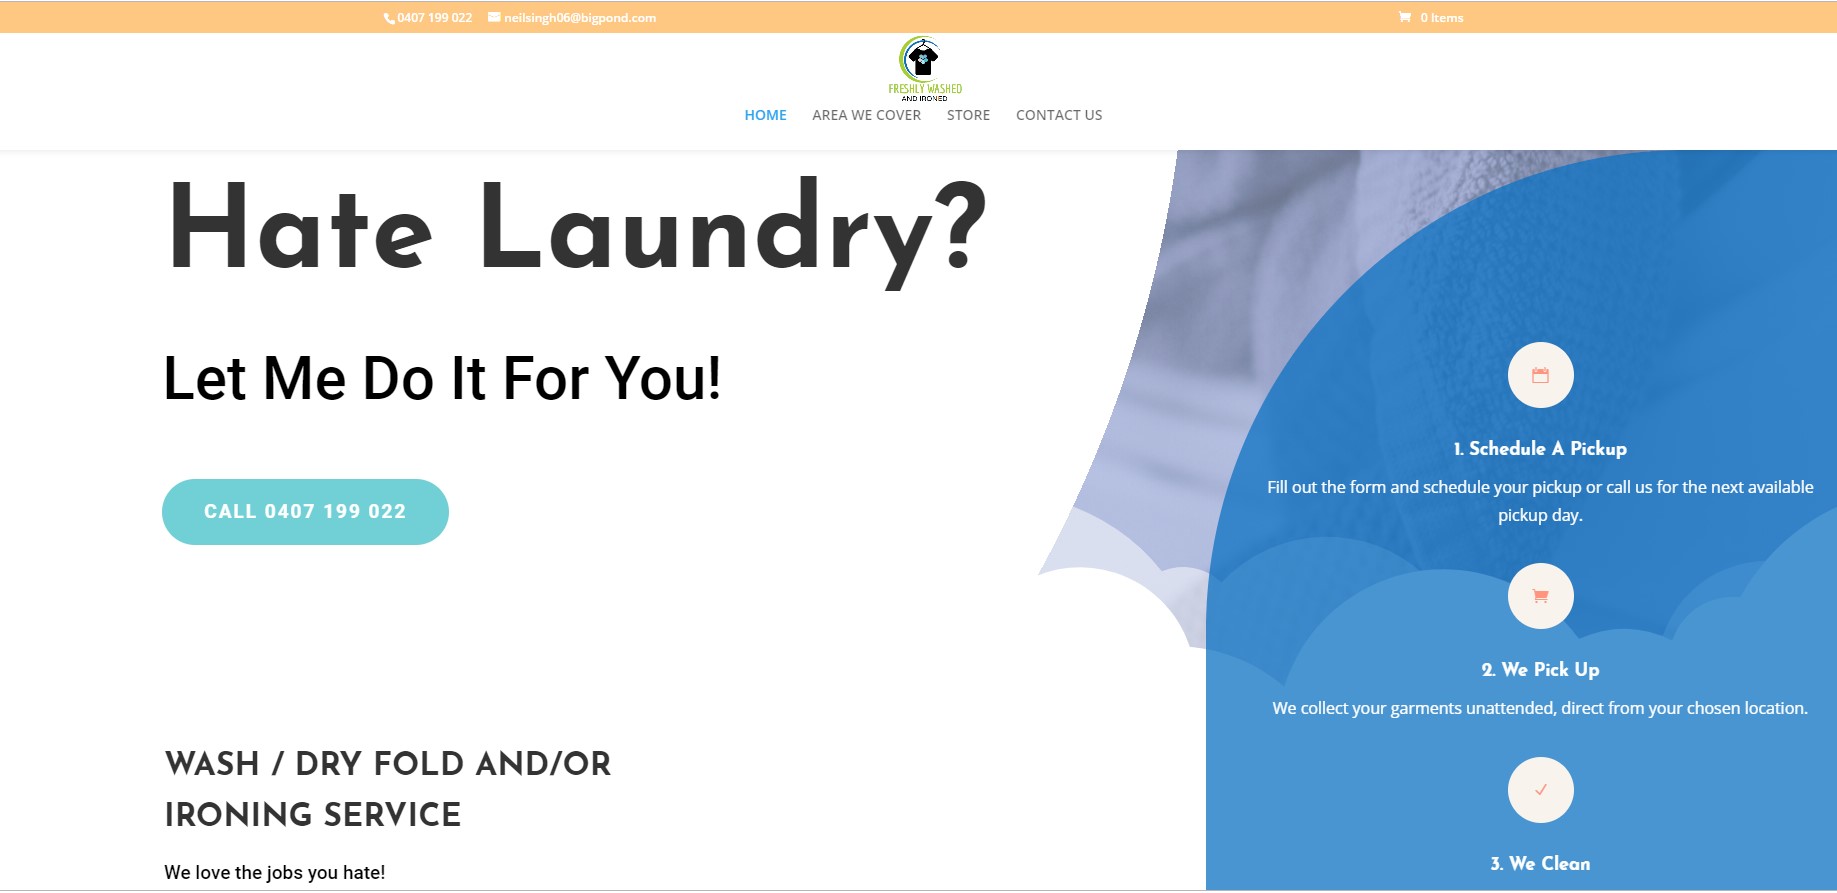 ironing washing folding laundry work from home start home business